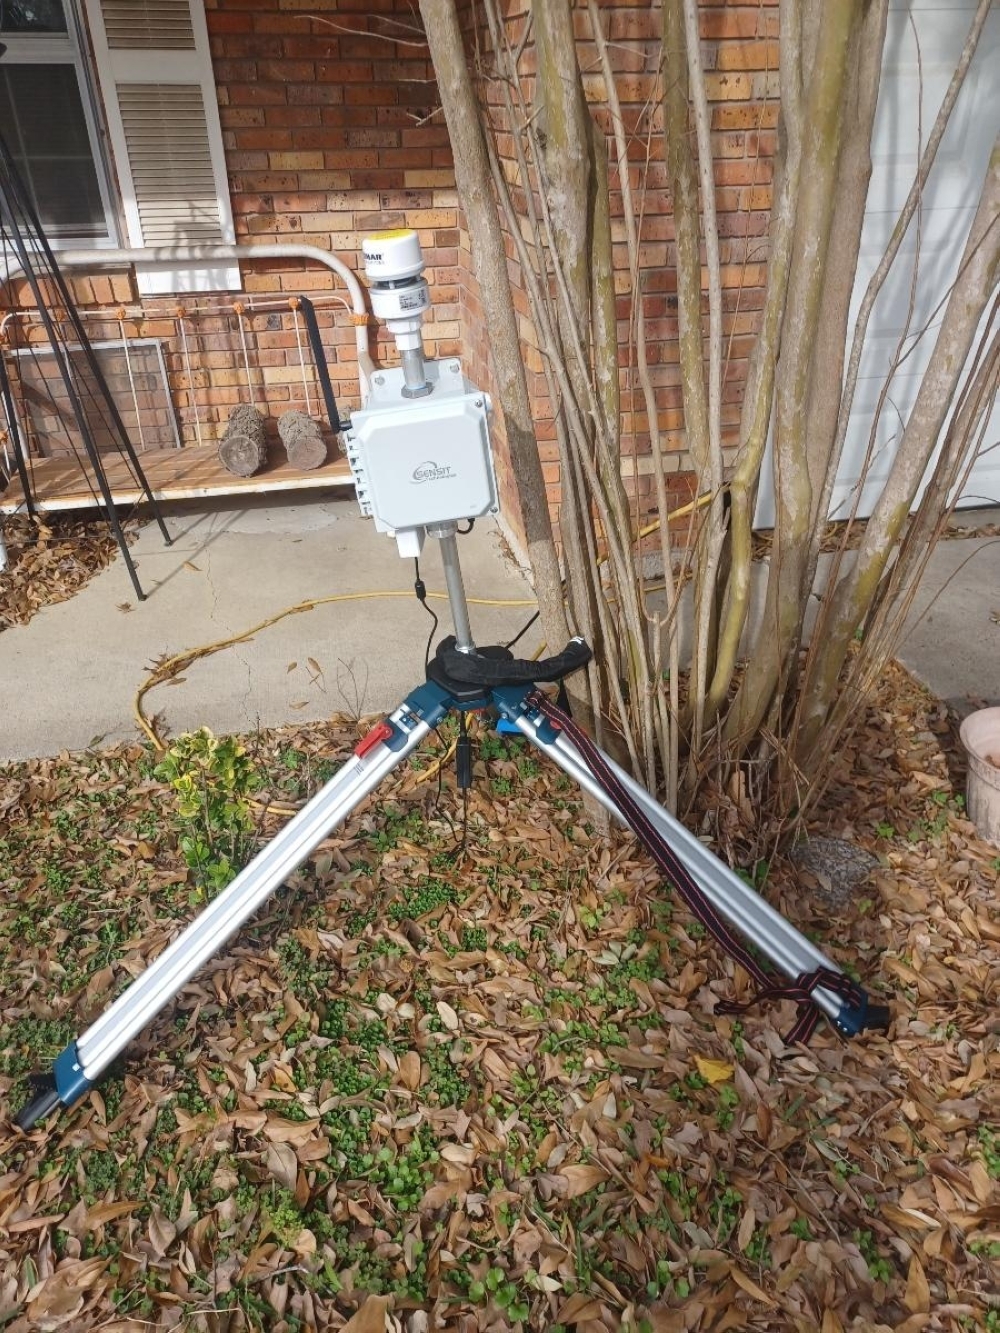 An air monitoring device was installed outside the home of Baytown resident Mike Szumski. He said the environmental group Air Alliance Houston installed the device that monitors air quality in his neighborhood. (Courtesy Mike Szumski)